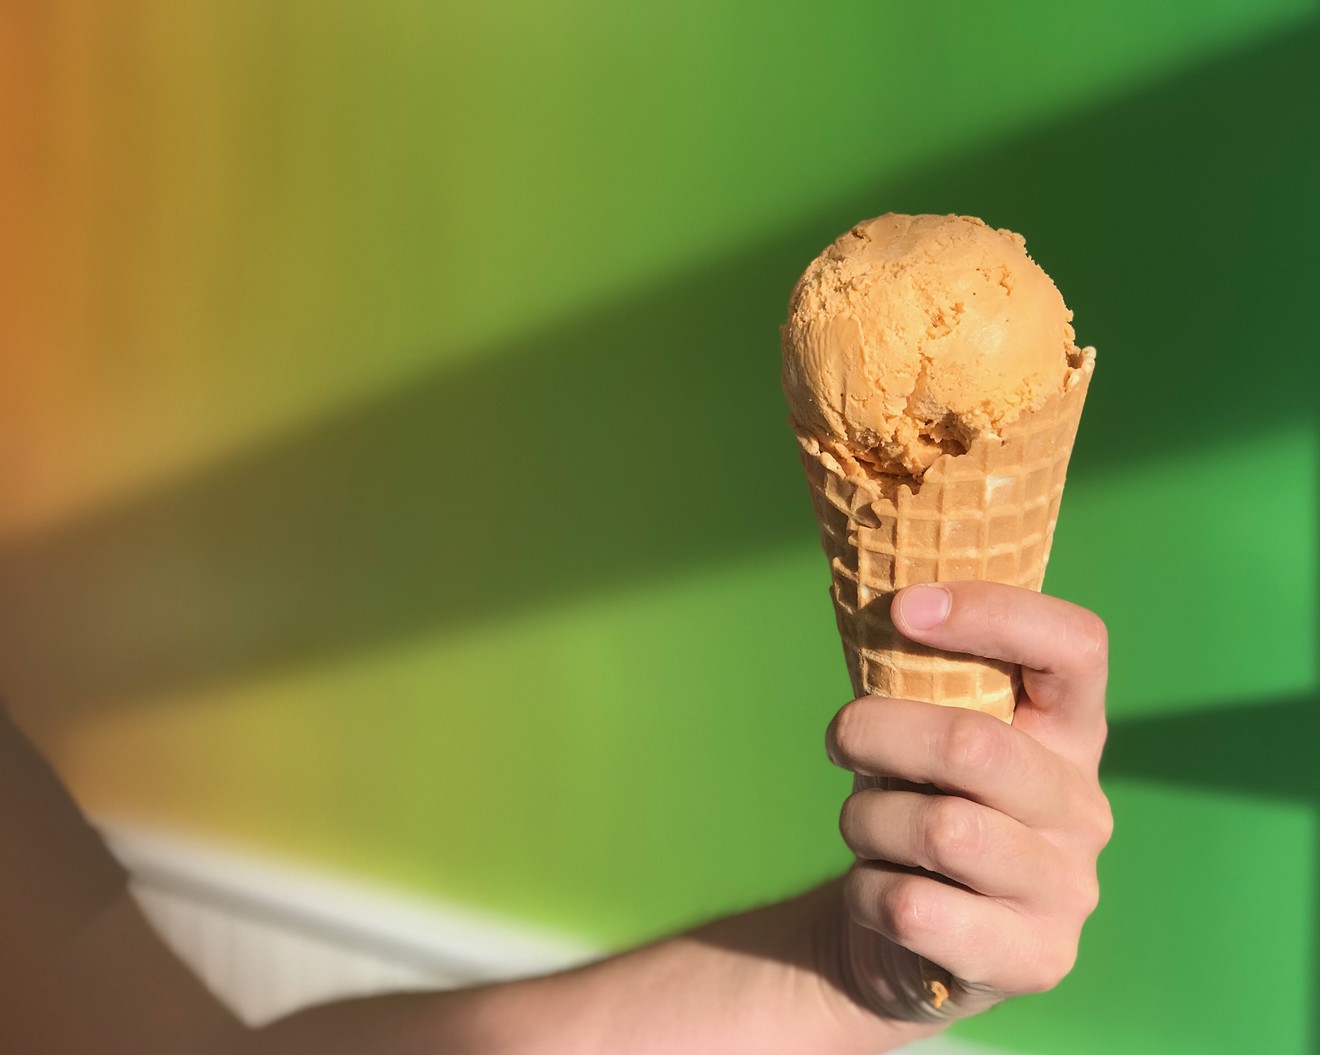 This is not your average ice cream cone.